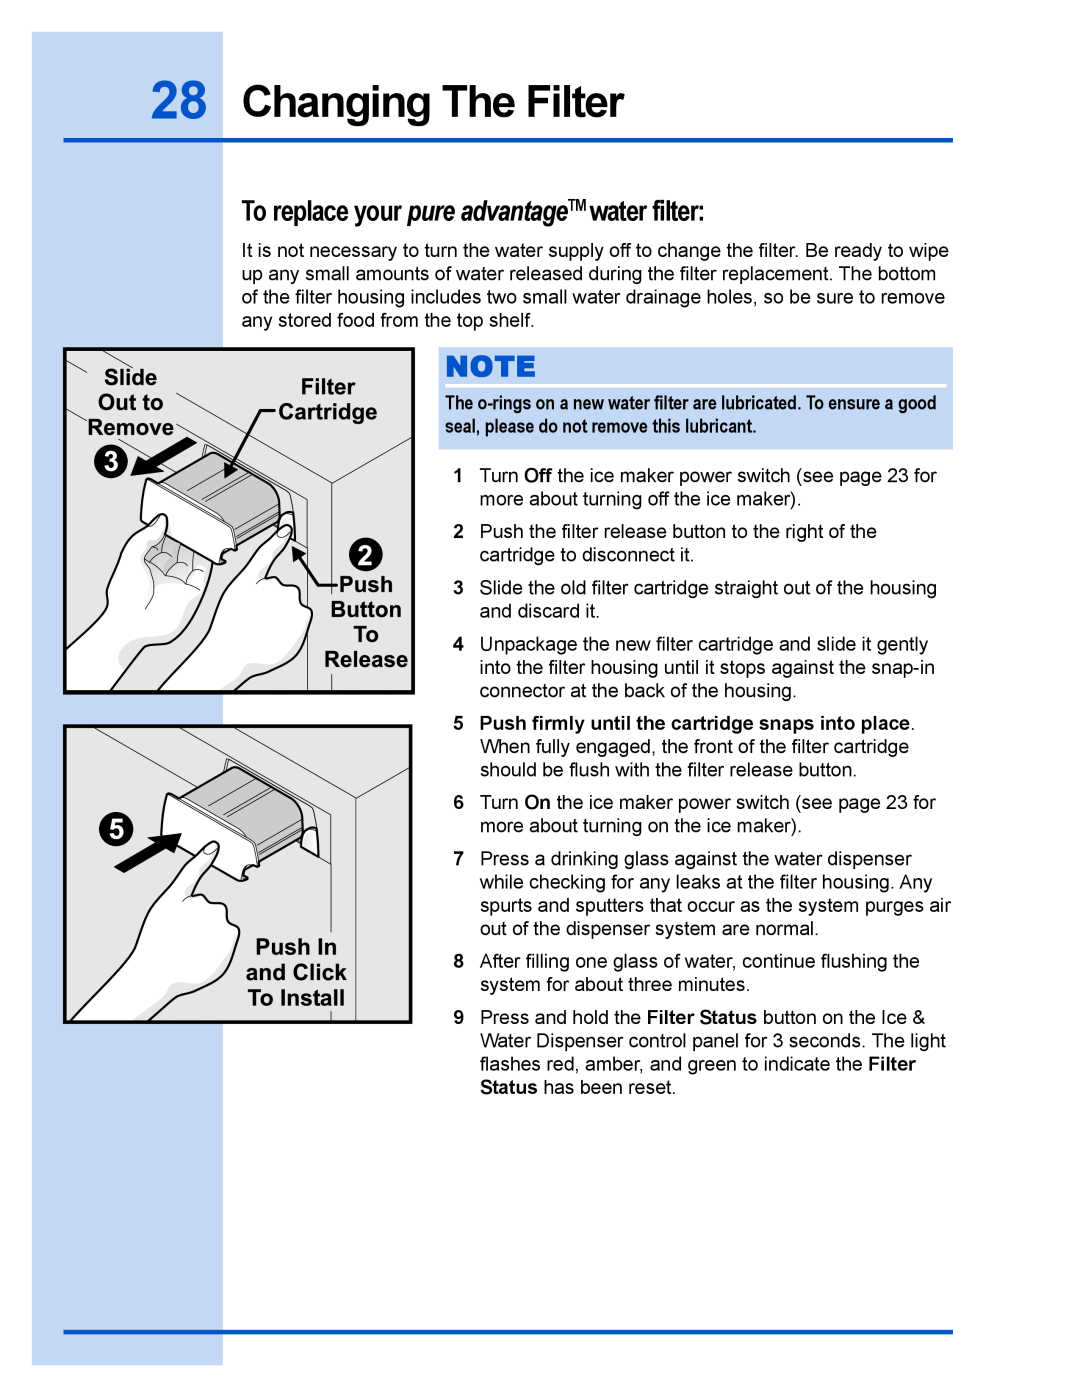 Electrolux 241540102 manual Changing The Filter, To replace your pure advantageTM water filter 